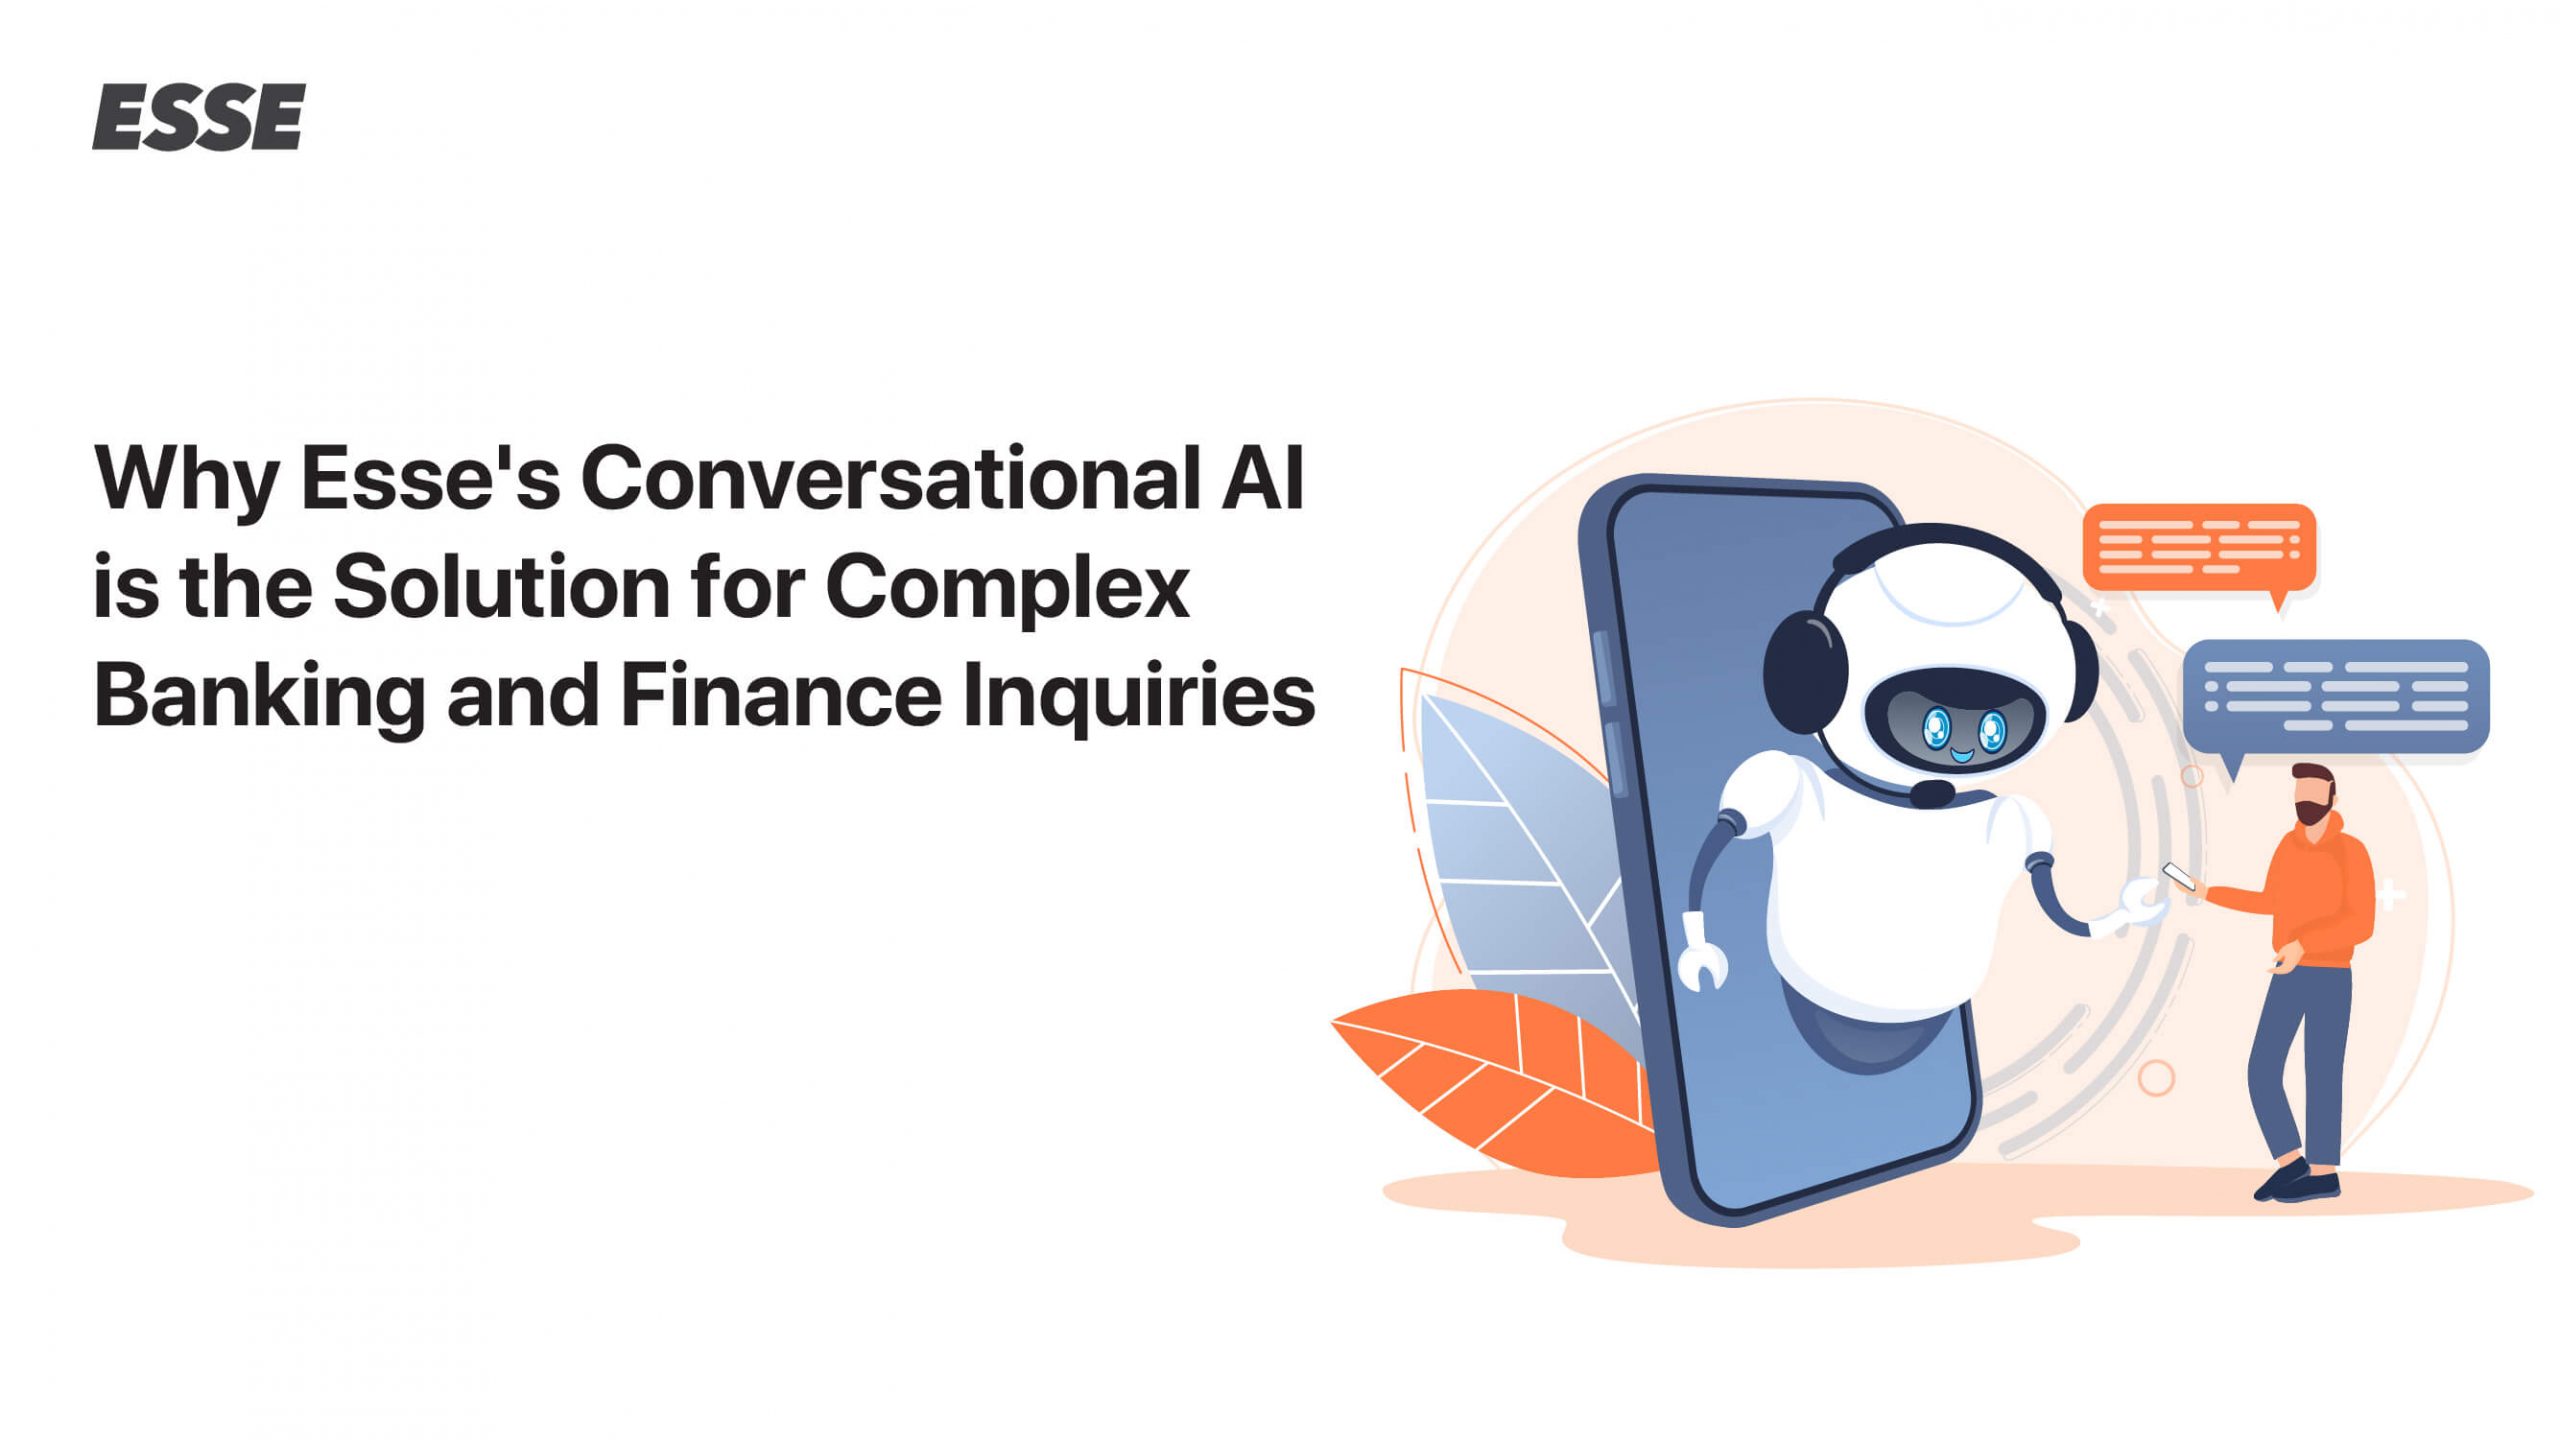 Why Esse’s Conversational AI is the Solution for Complex Banking and Finance Inquiries